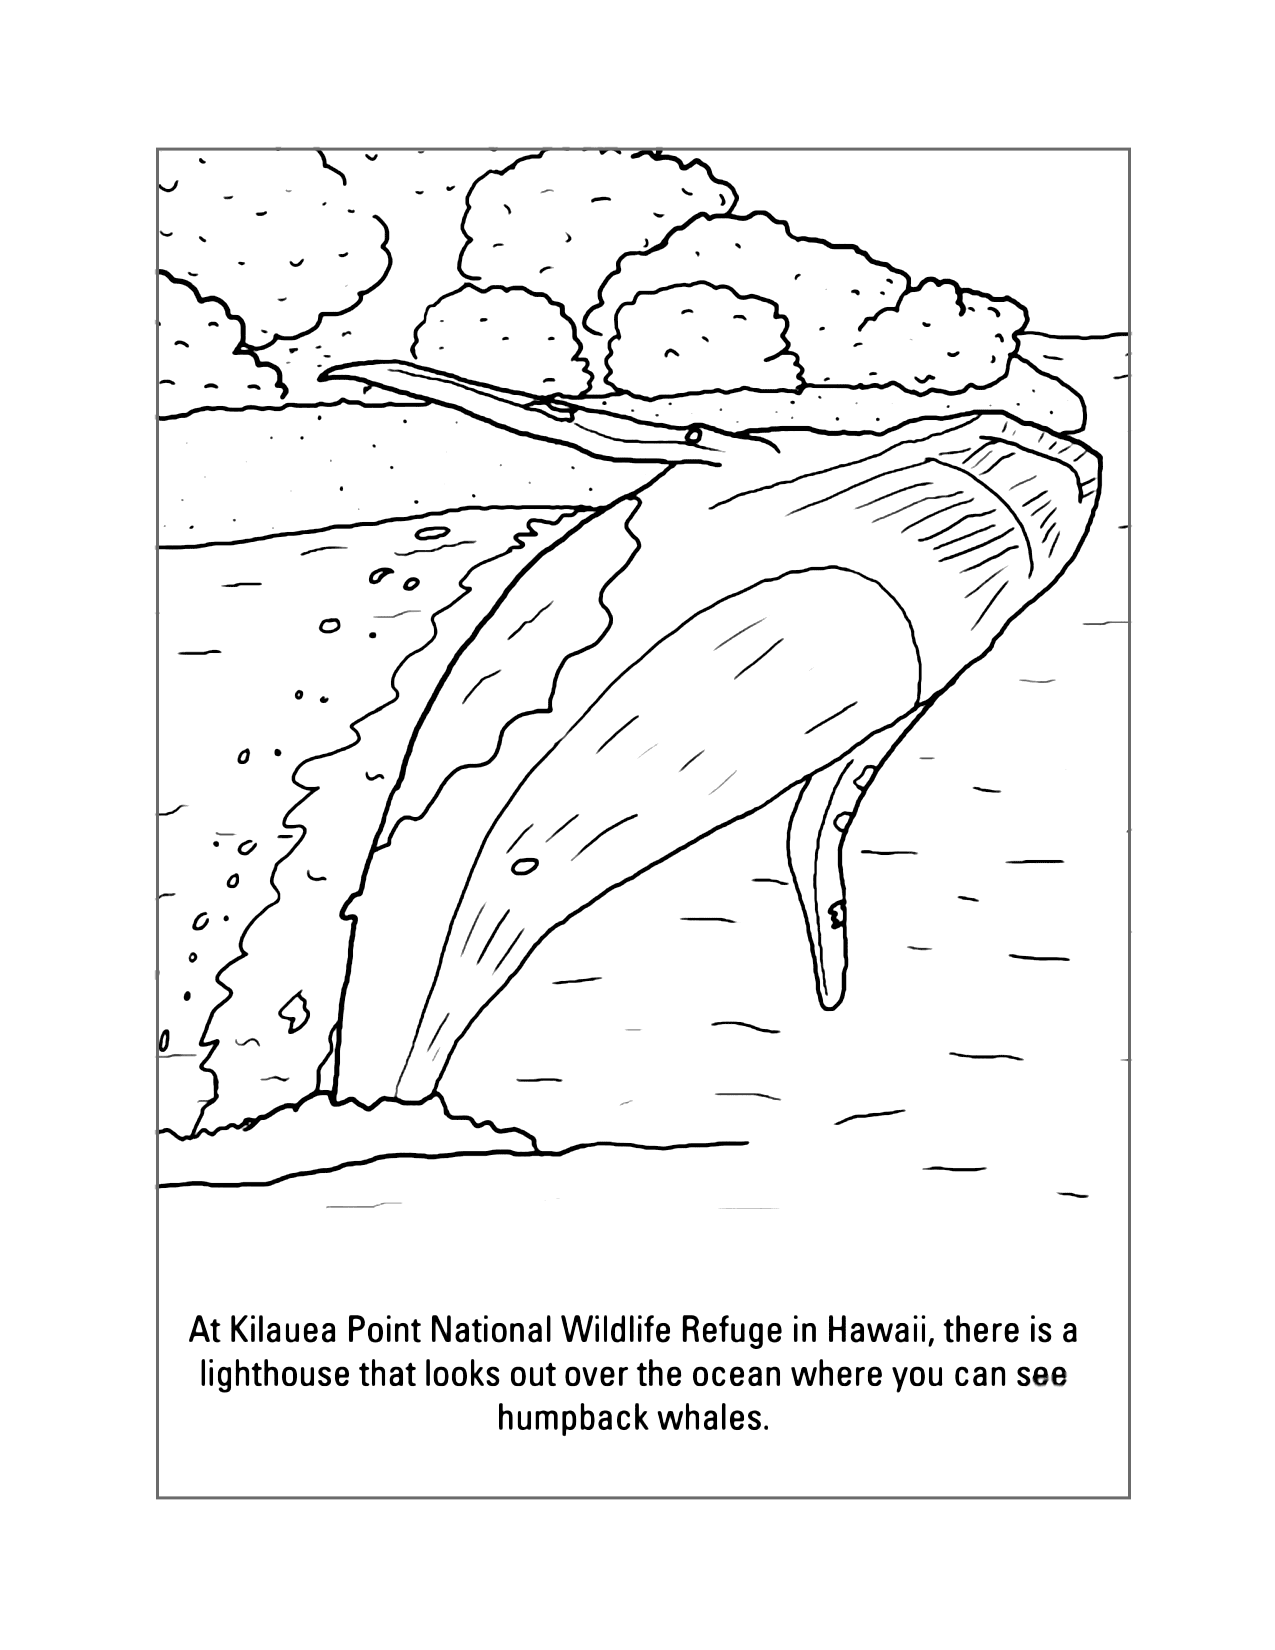 Humpback Whales In Hawaii Coloring Page